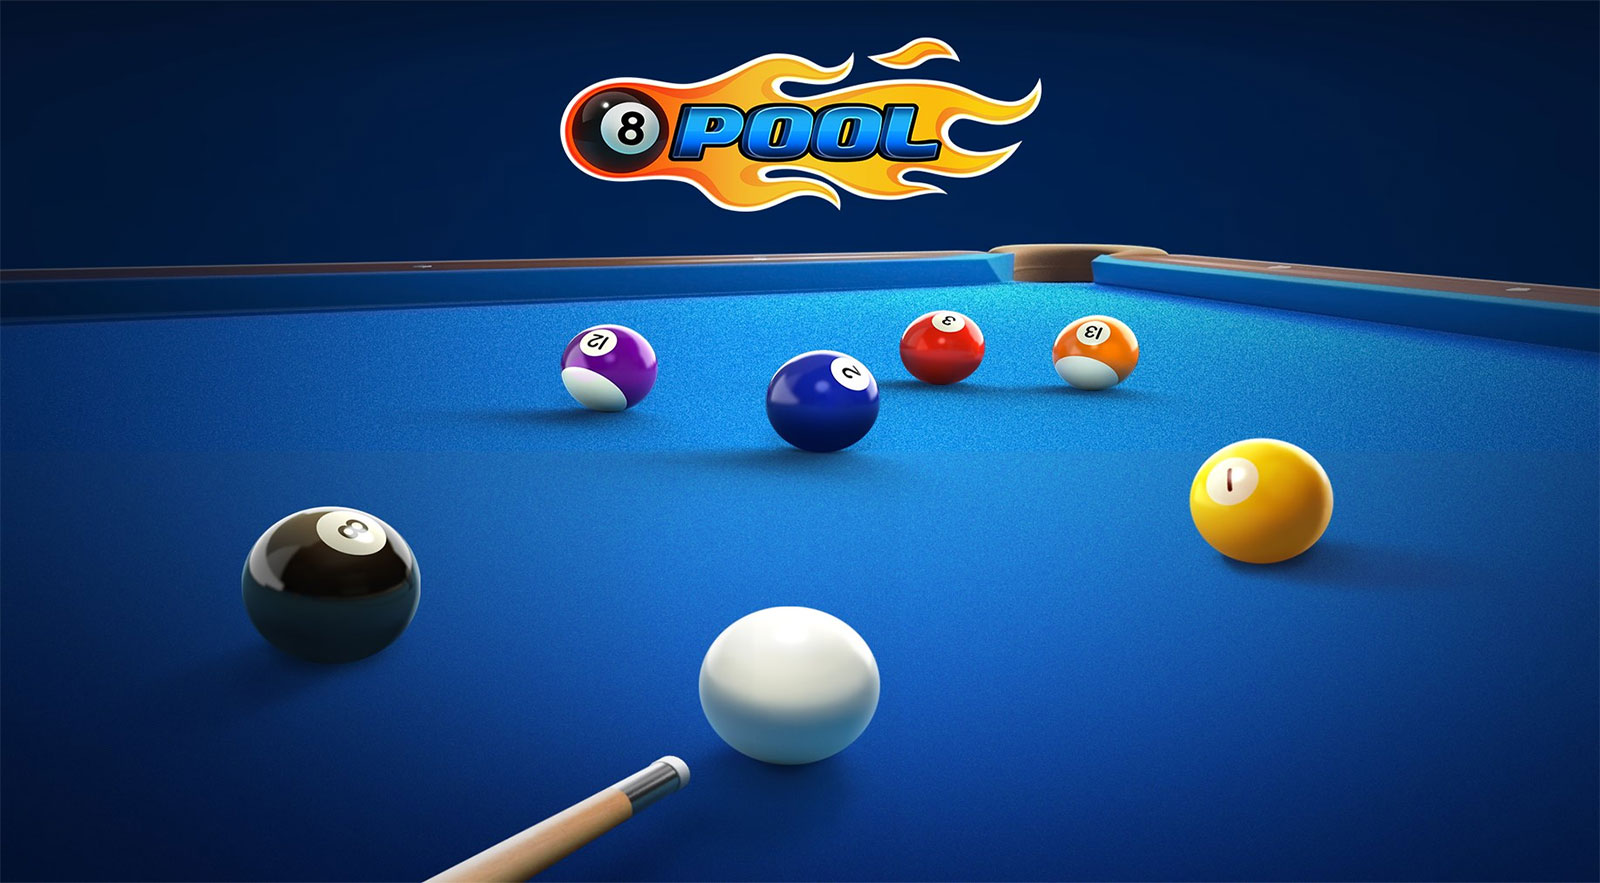 8 ball pool apk free download for pc windows 7